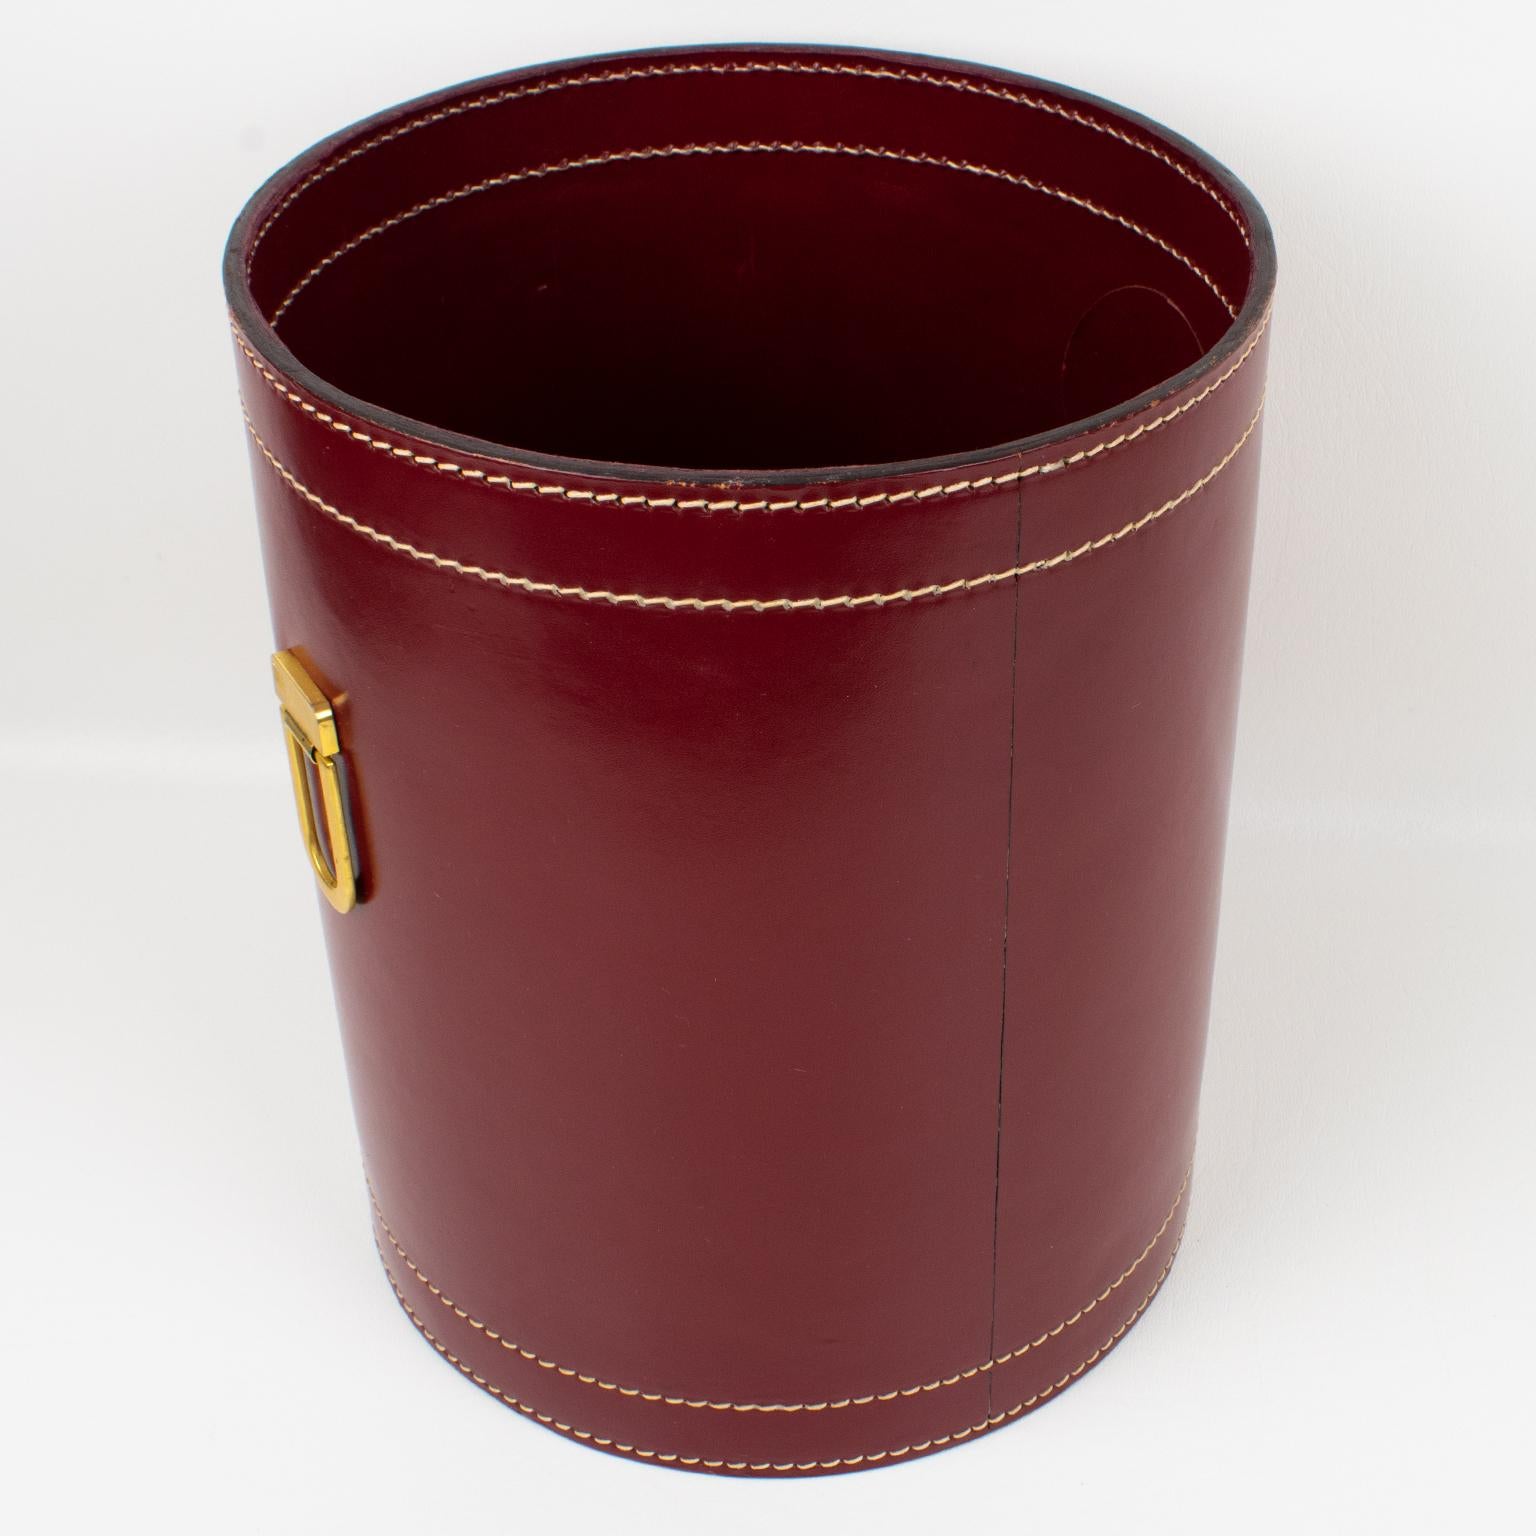 Art Deco Hand-Stitched Red Leather Desk Office Paper Waste Basket 3